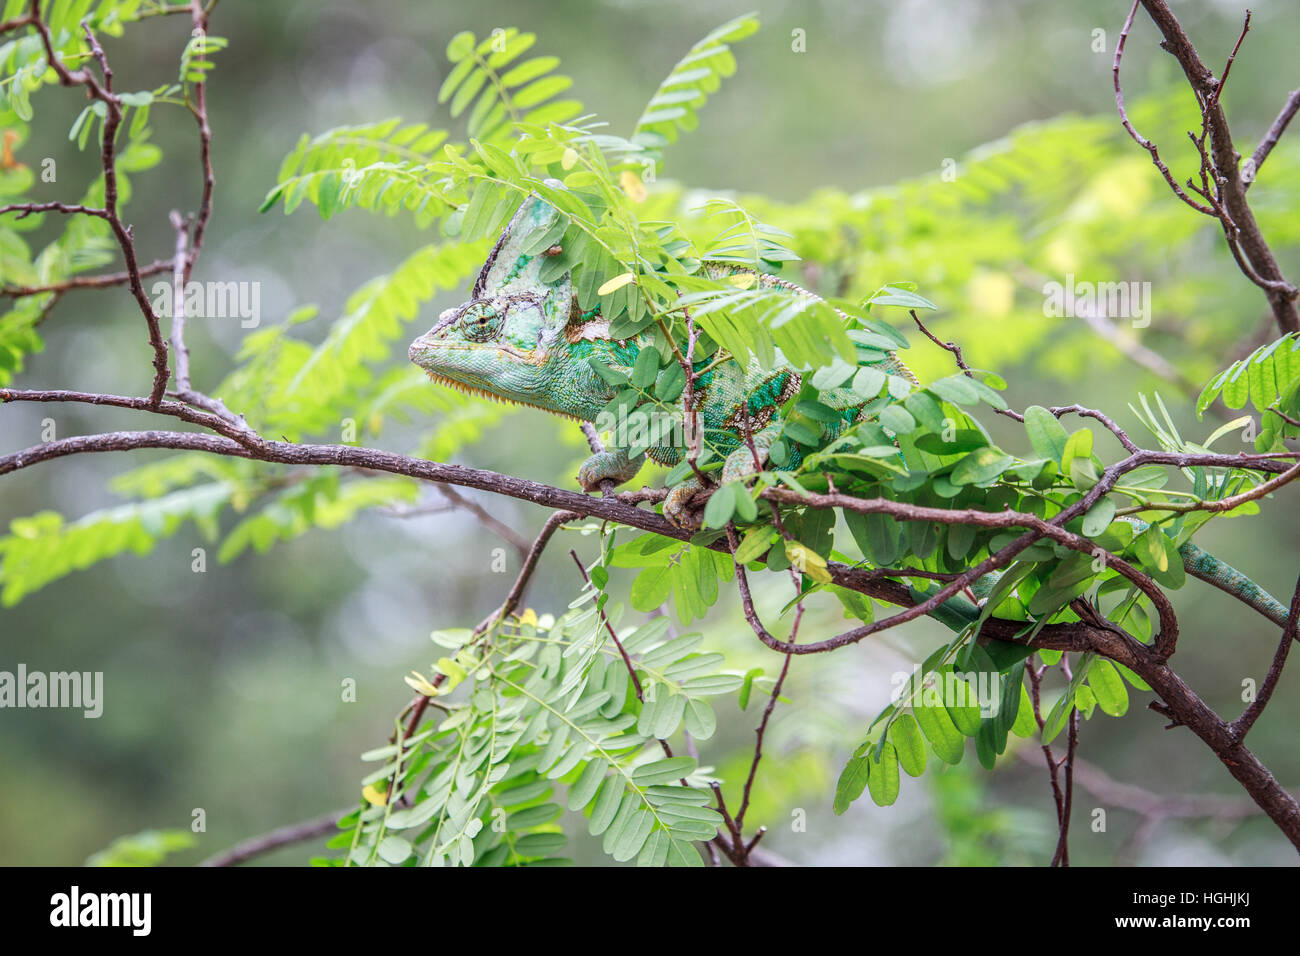 Veiled Chameleon hiding on a branch in Africa. Stock Photo